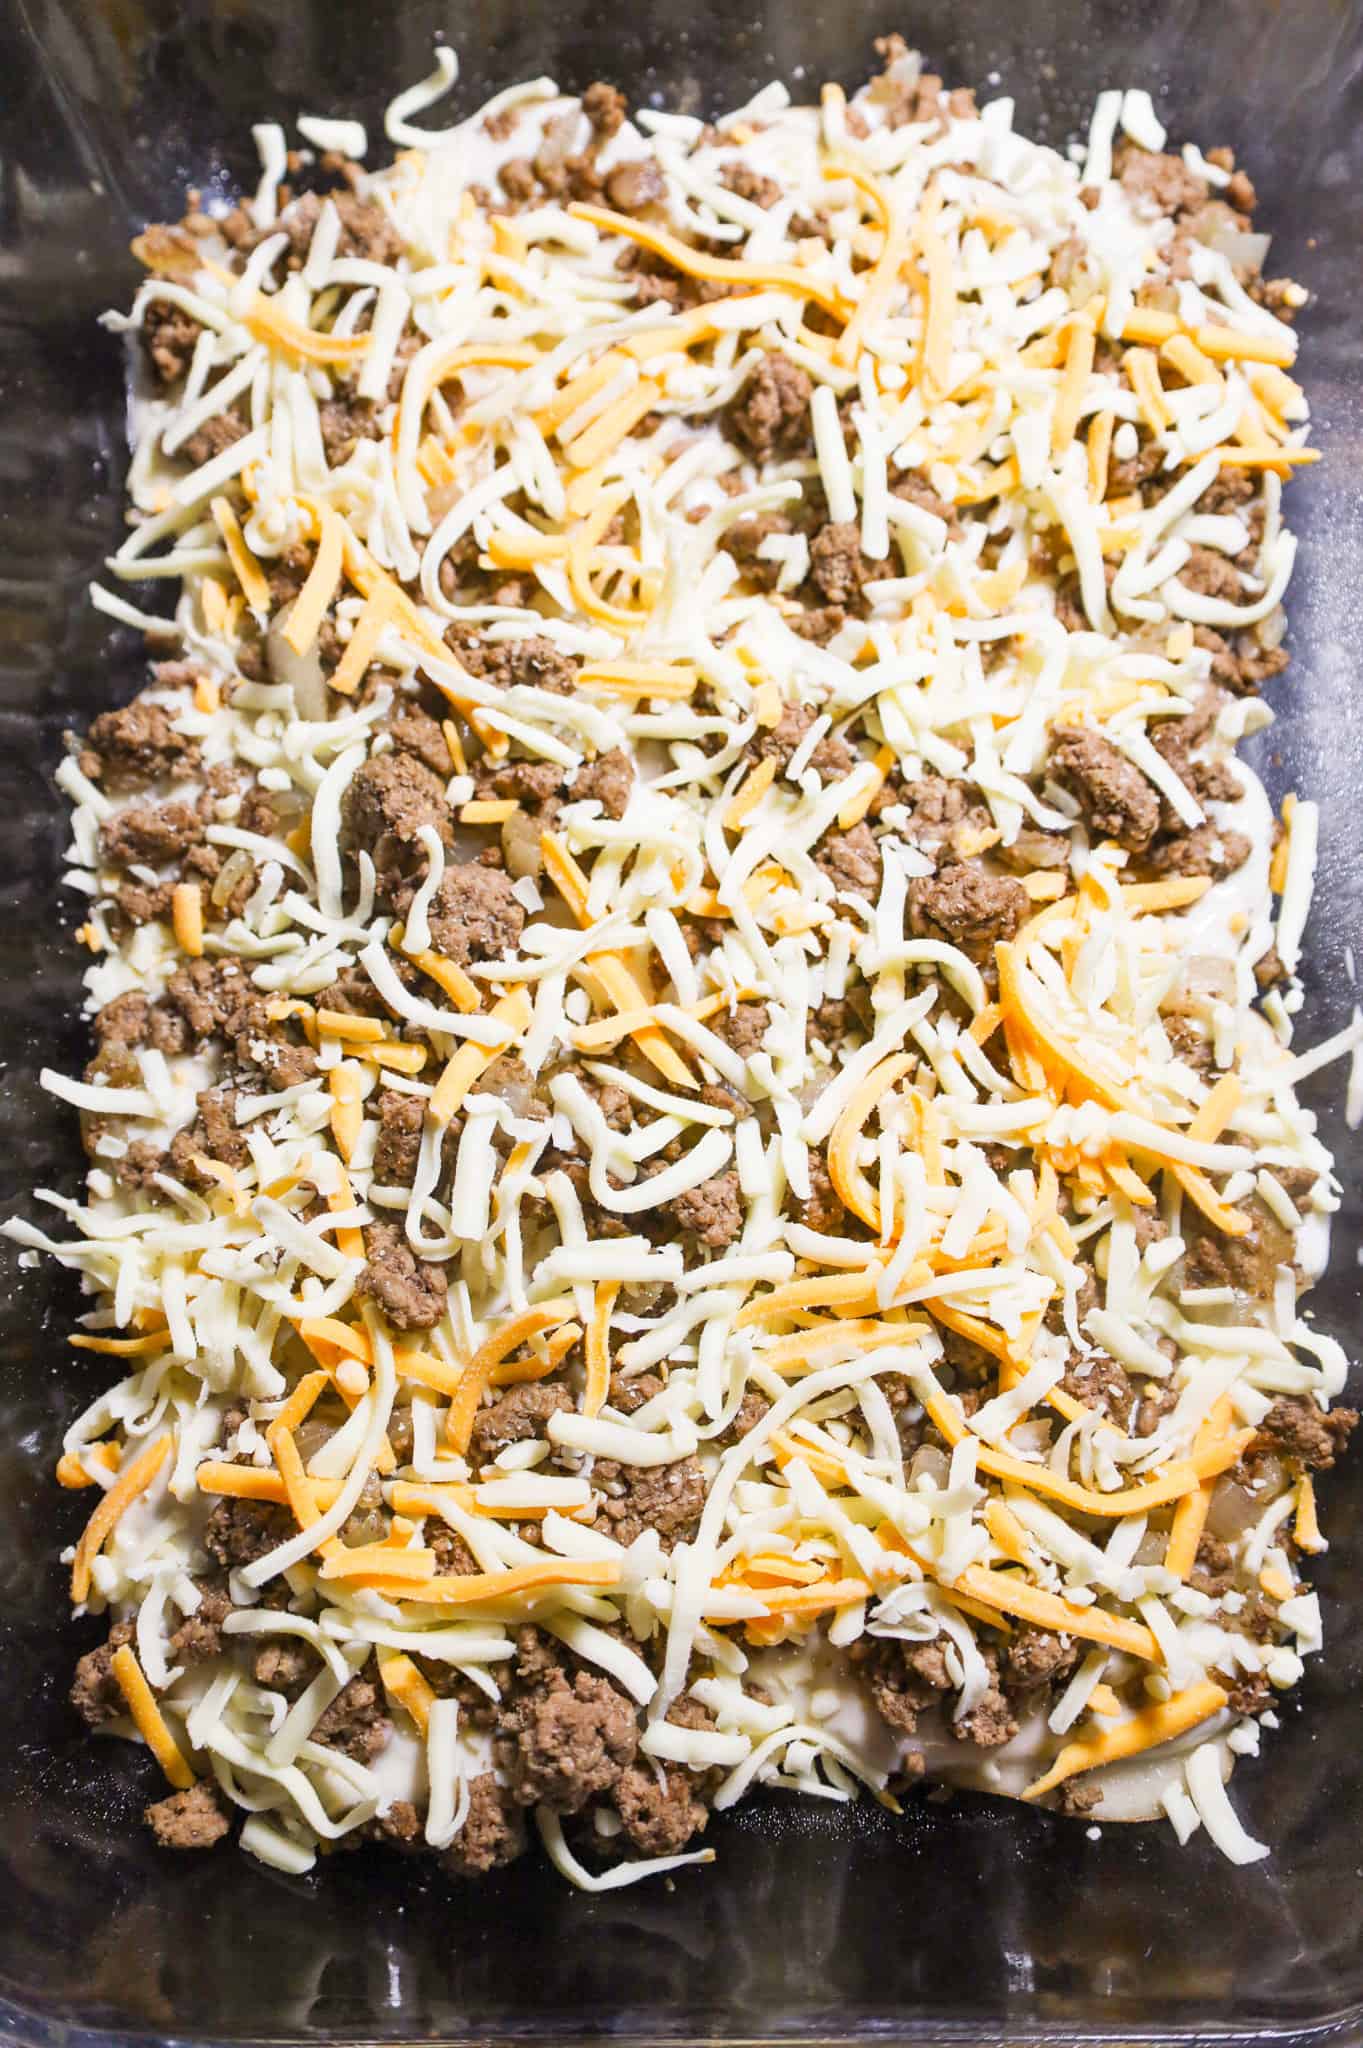 ground beef and shredded cheese on top of sliced potatoes in a baking dish